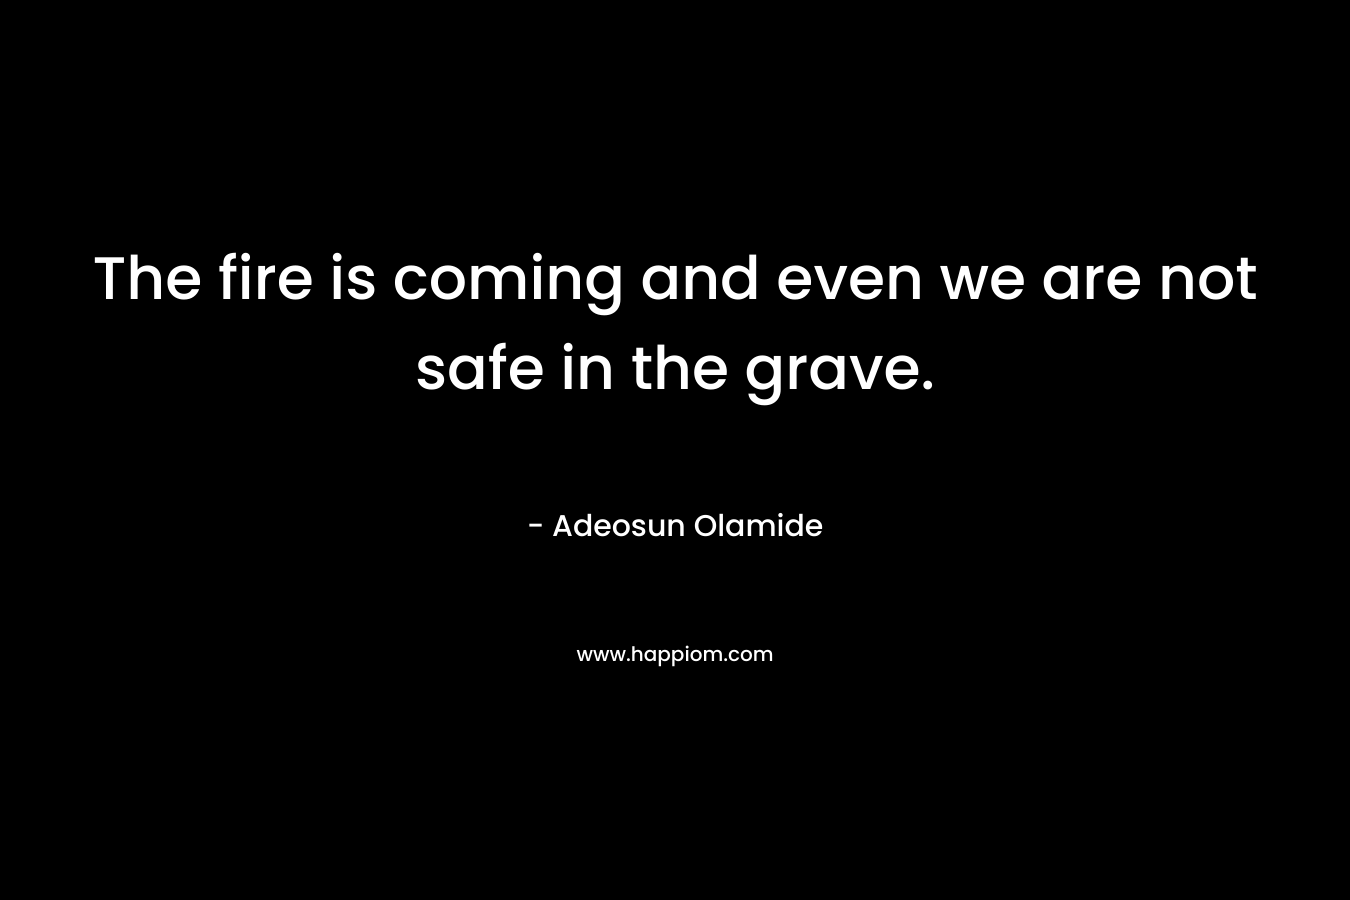 The fire is coming and even we are not safe in the grave. – Adeosun Olamide